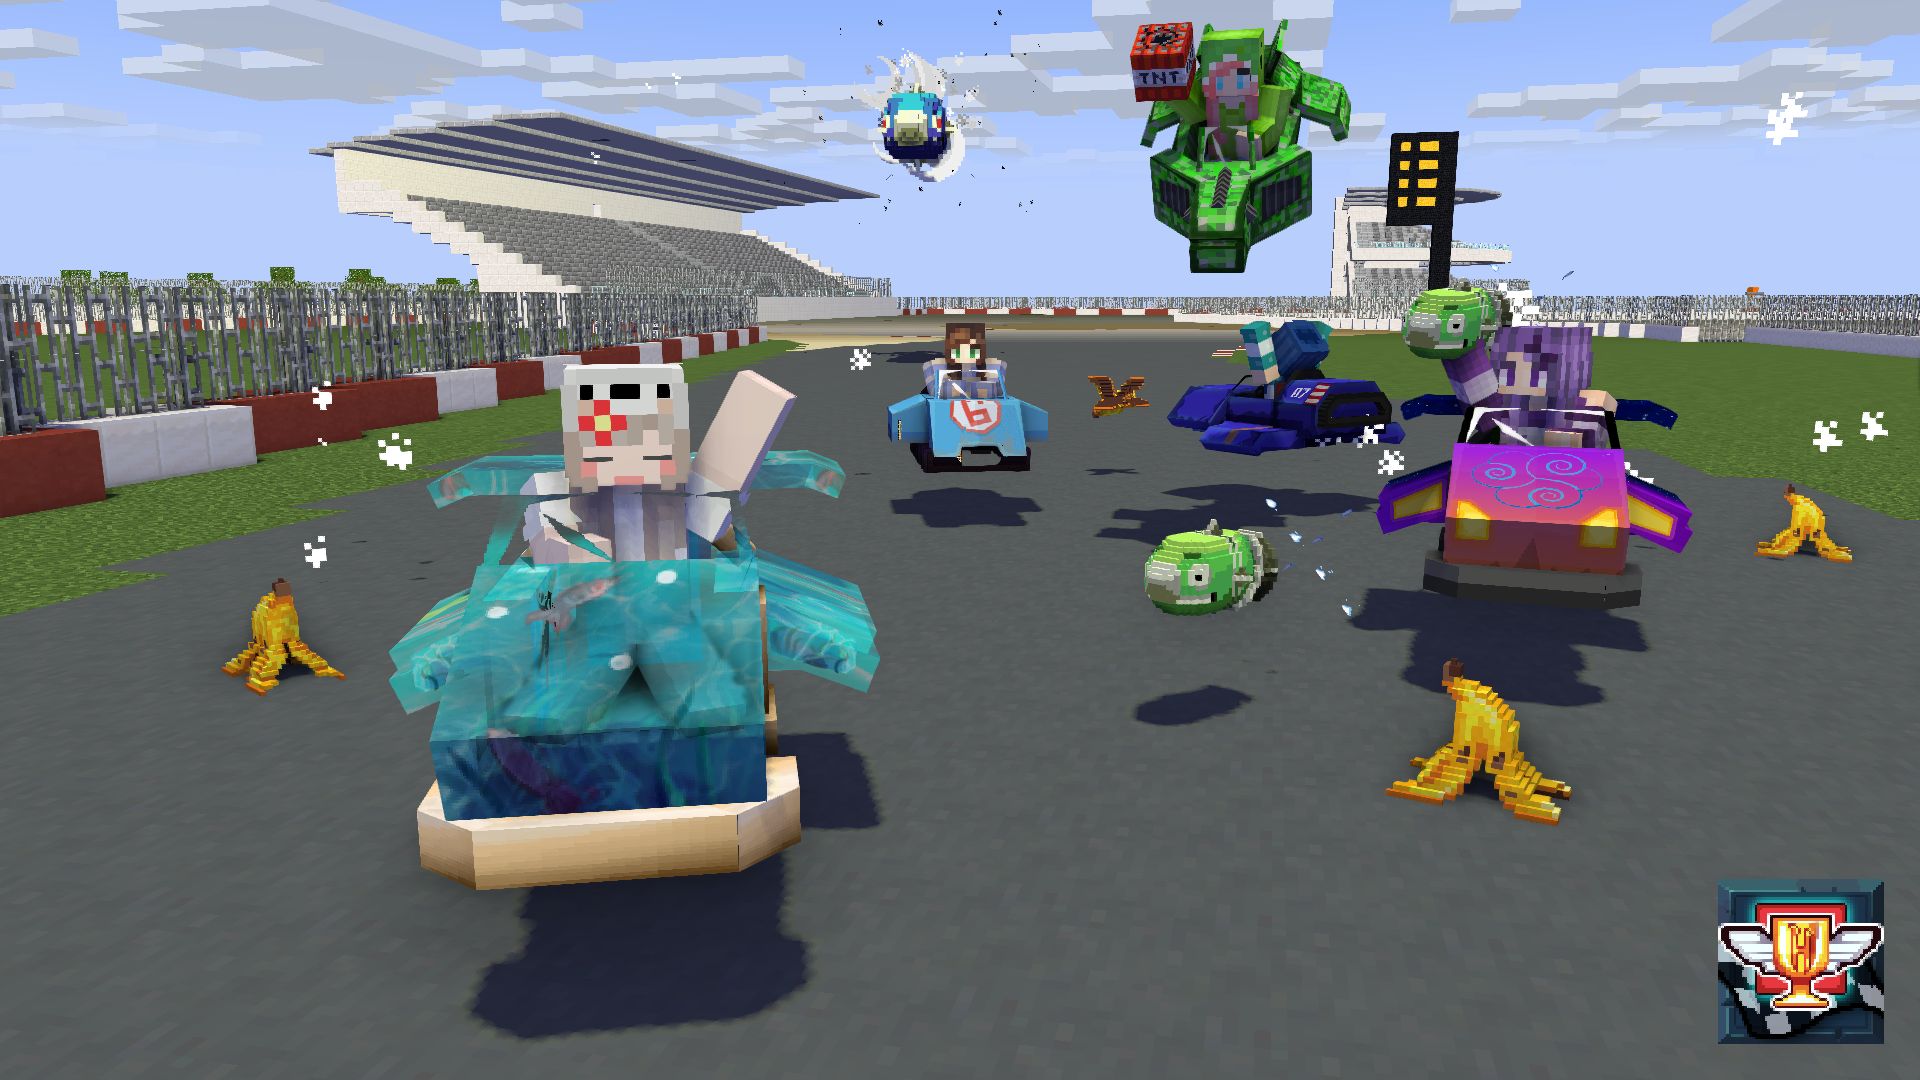 Wallpaper] Turbo Kart Racers | Hypixel - Minecraft Server and Maps